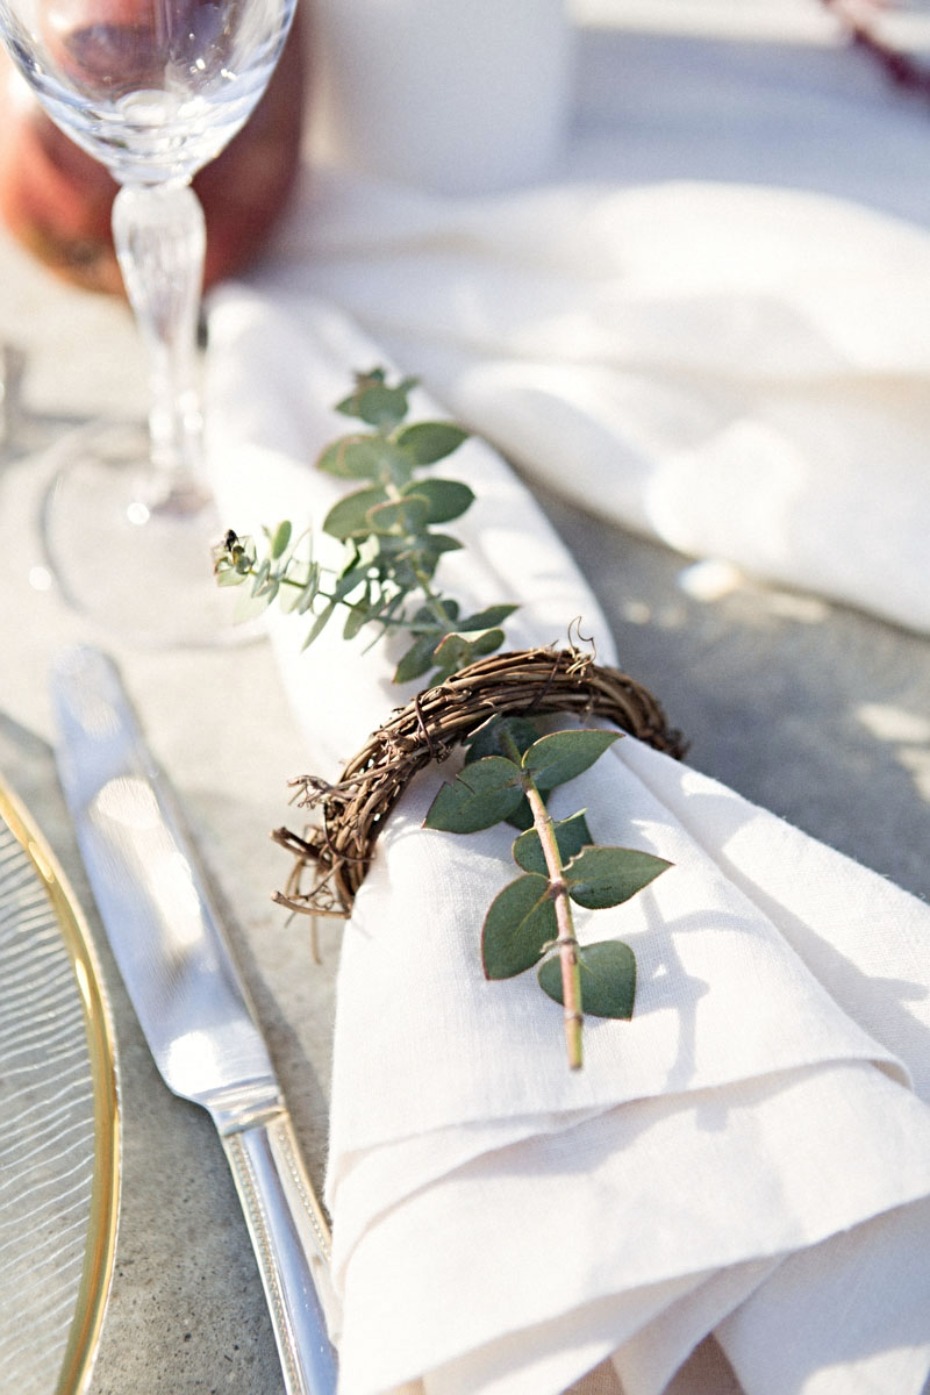 Add a sprig of greenery to your napkin